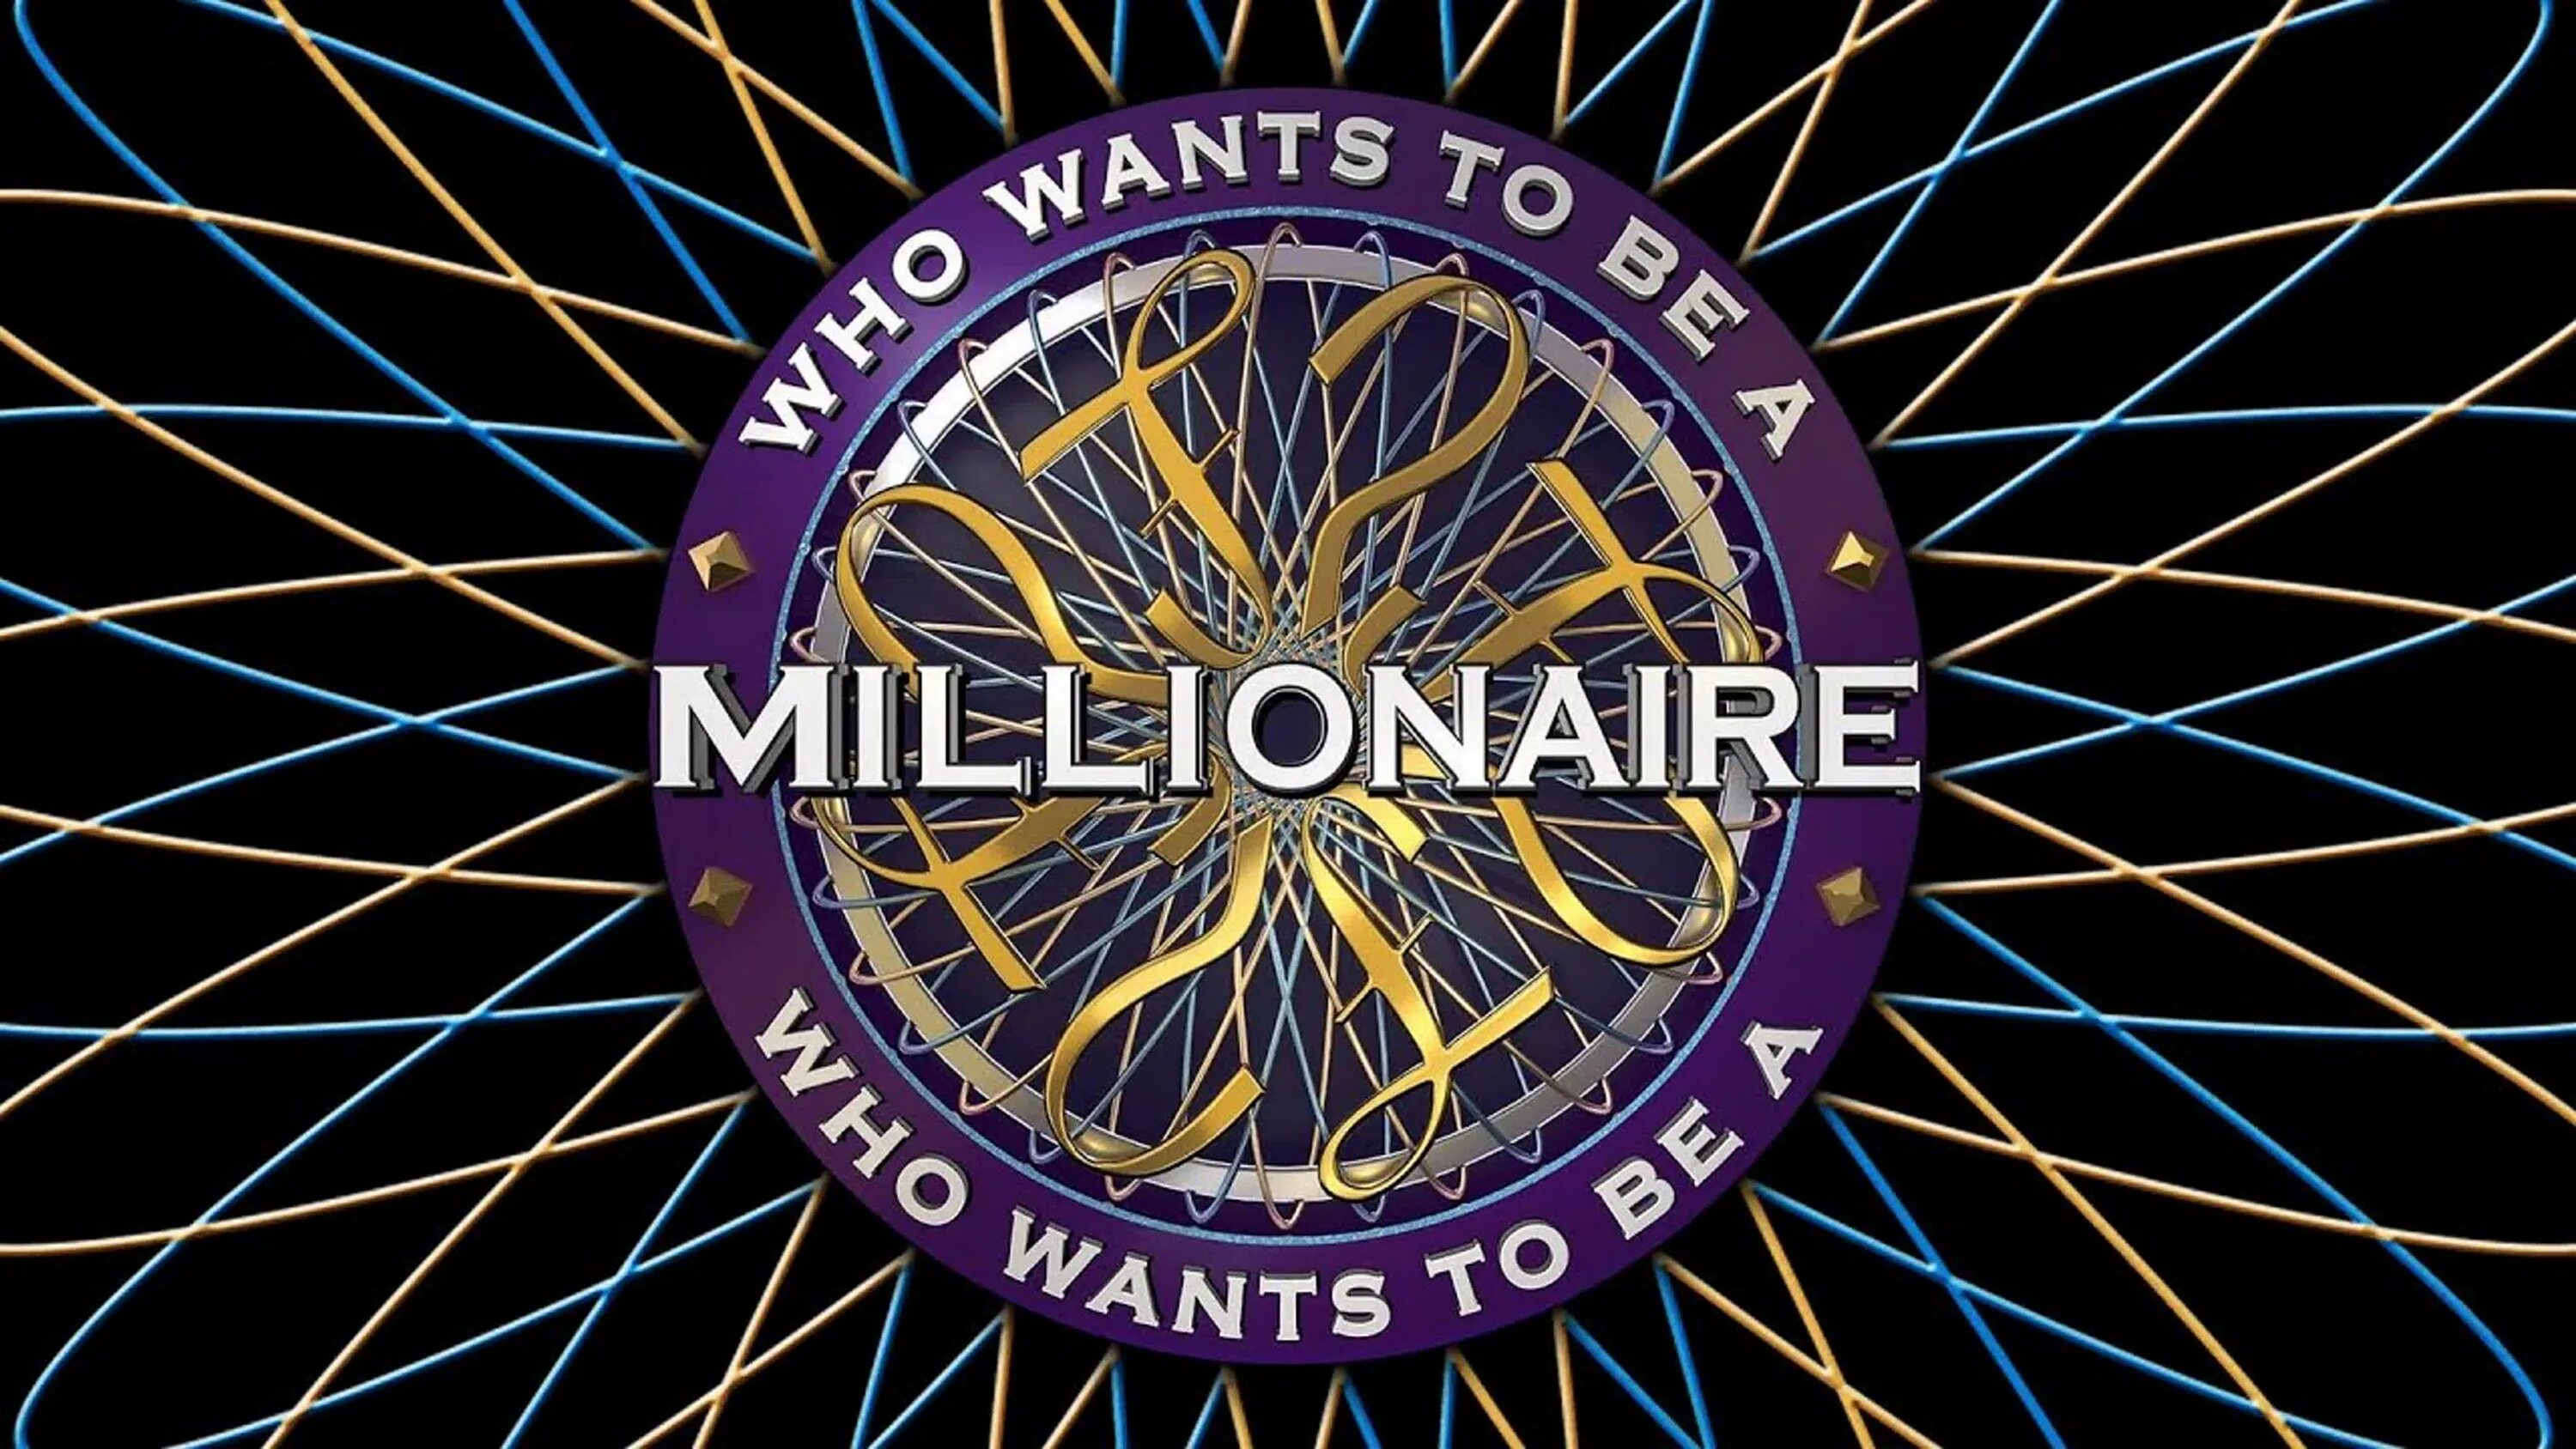 Who wants to be a Millionaire. Who wants to be a Millionaire логотип. Who wants to be a Millionaire 1998. Who wants to be a Millionaire uk 1998. Who wants to be the to my